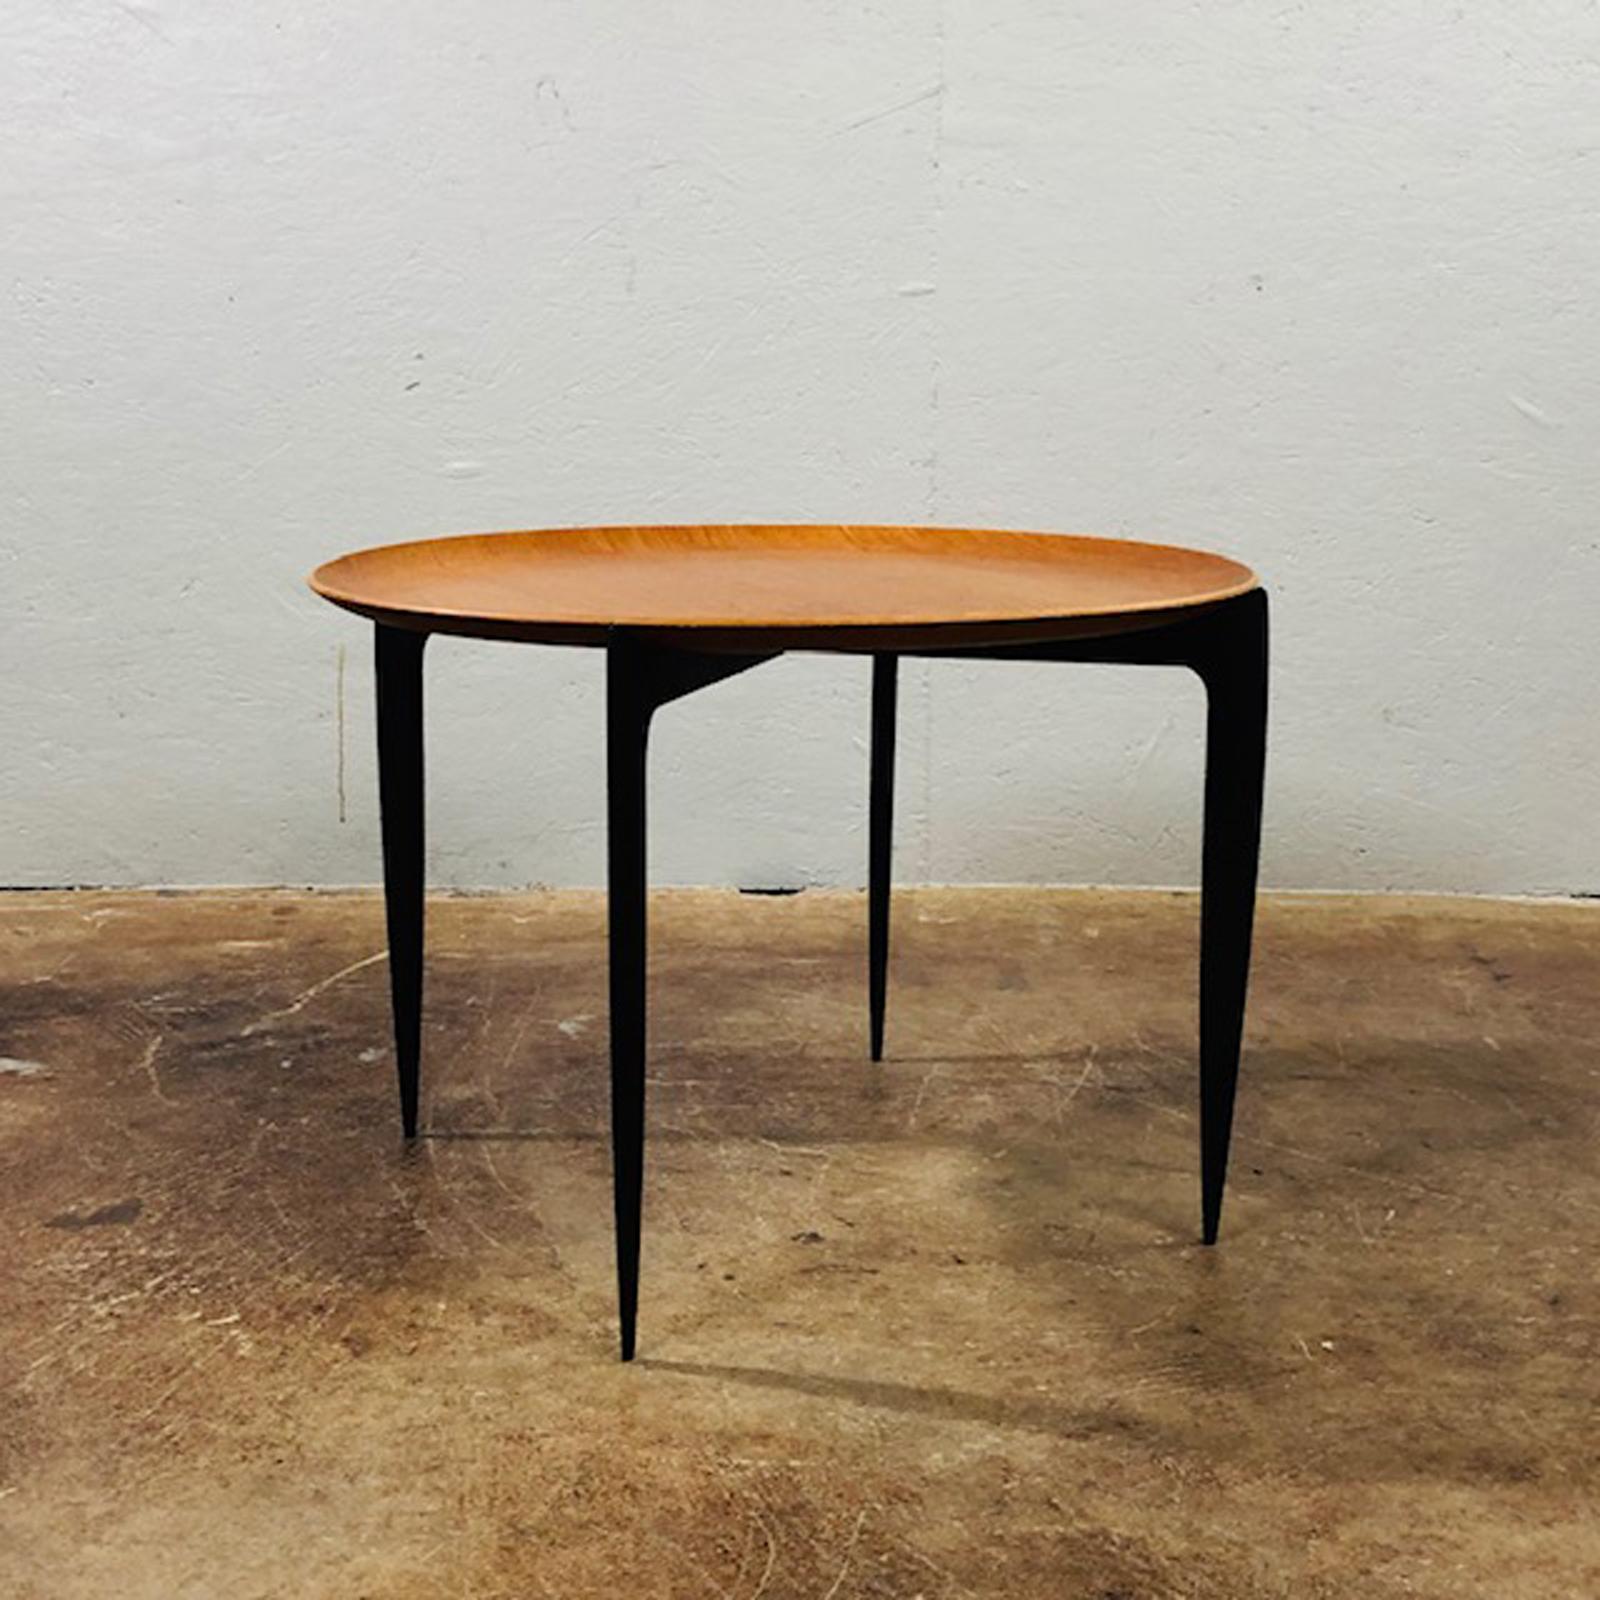 Fritz Hansen folding table designed in 1958 by H. Engholm and Svend A°ge Willumsen. Ebonized base folds for storage. The tray lifts off for serving and transport, circa 1960s.